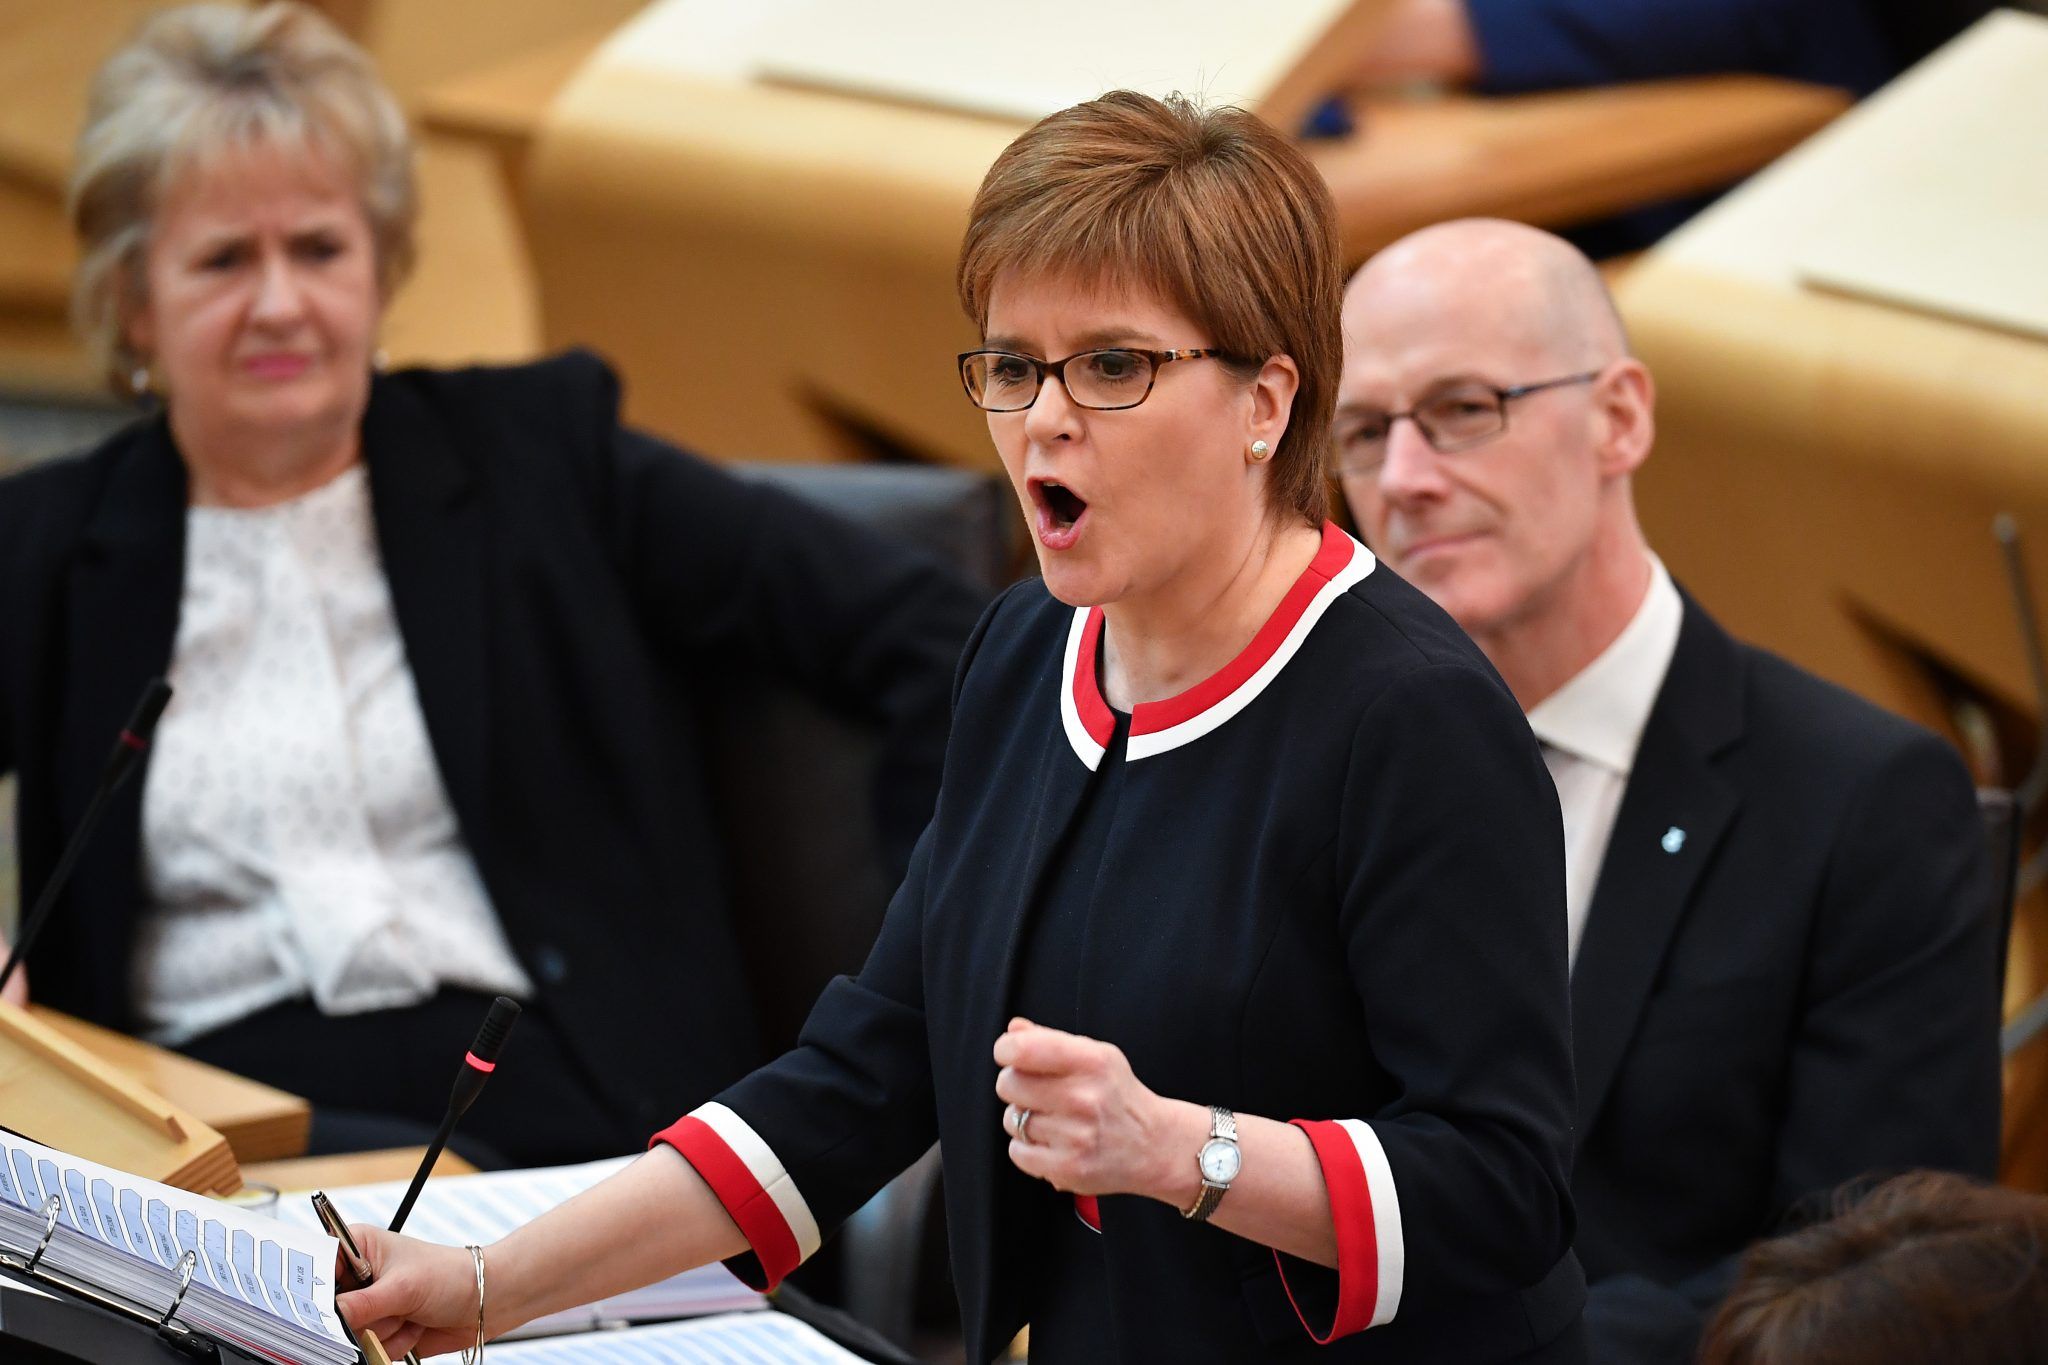 Nicola Sturgeon during first minister's questions at Holyrood today (Credit: Jeff J Mitchell)